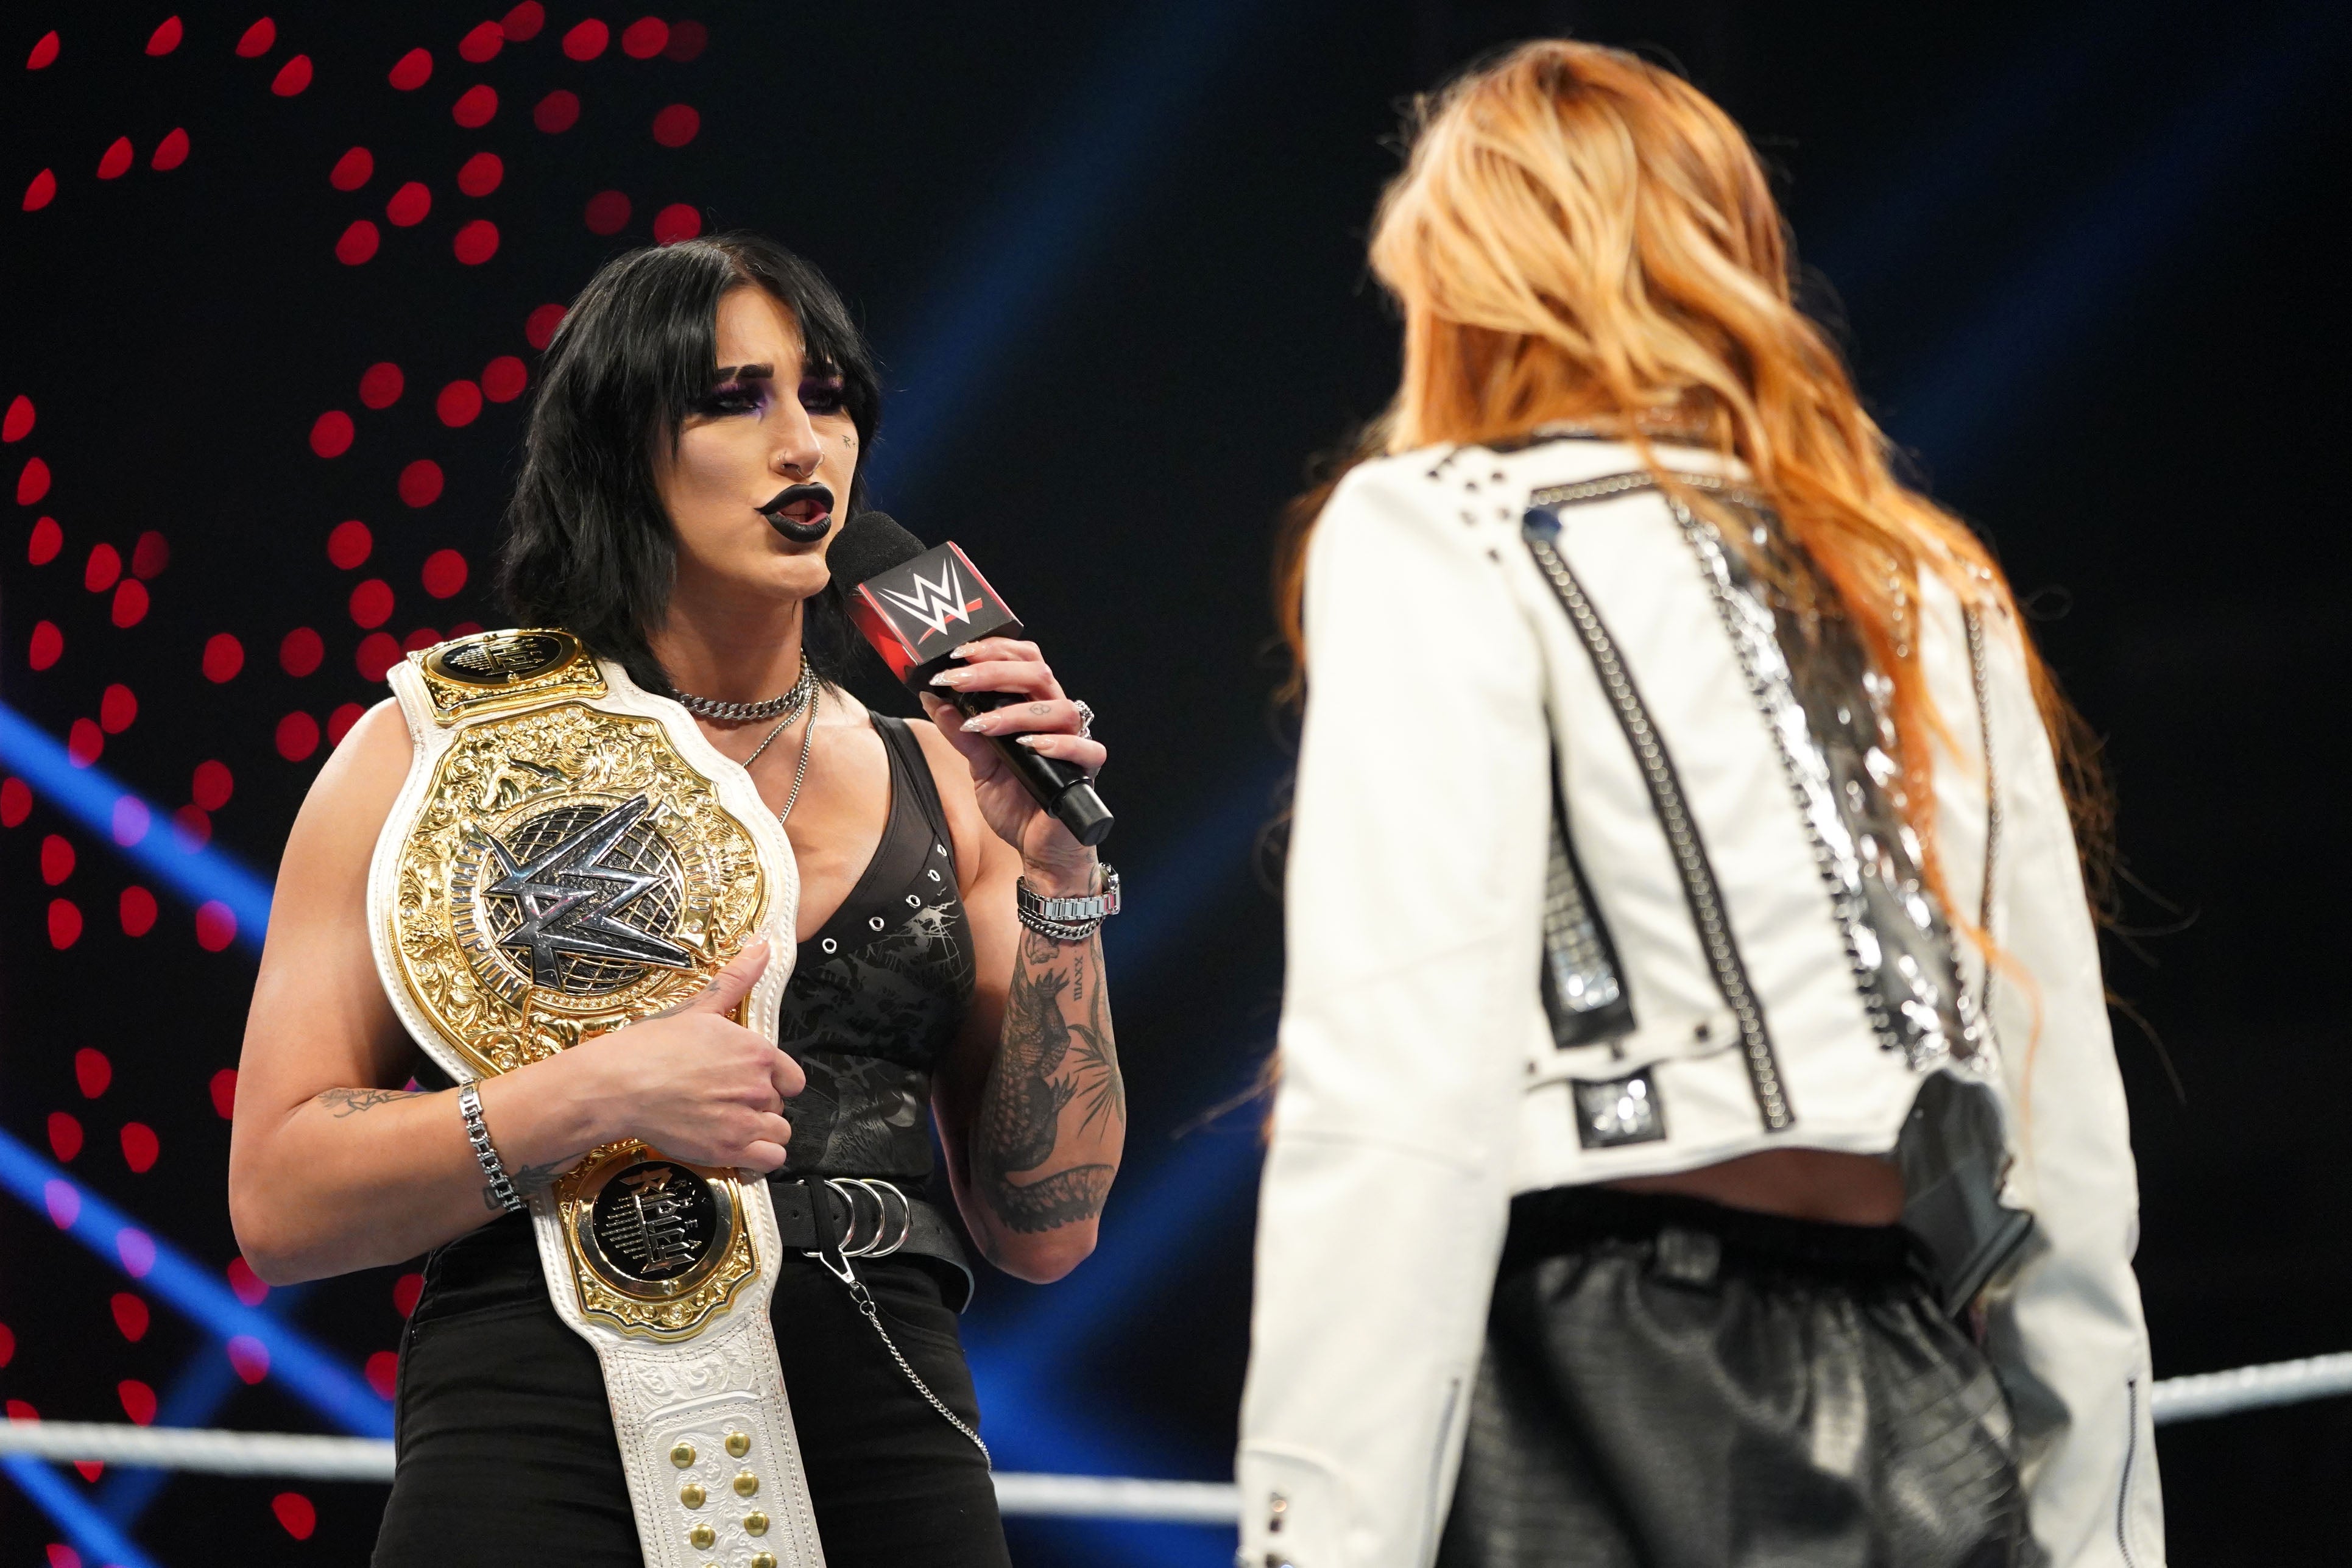 Rhea Ripley and Becky Lynch are two of the biggest women’s WWE stars in recent years